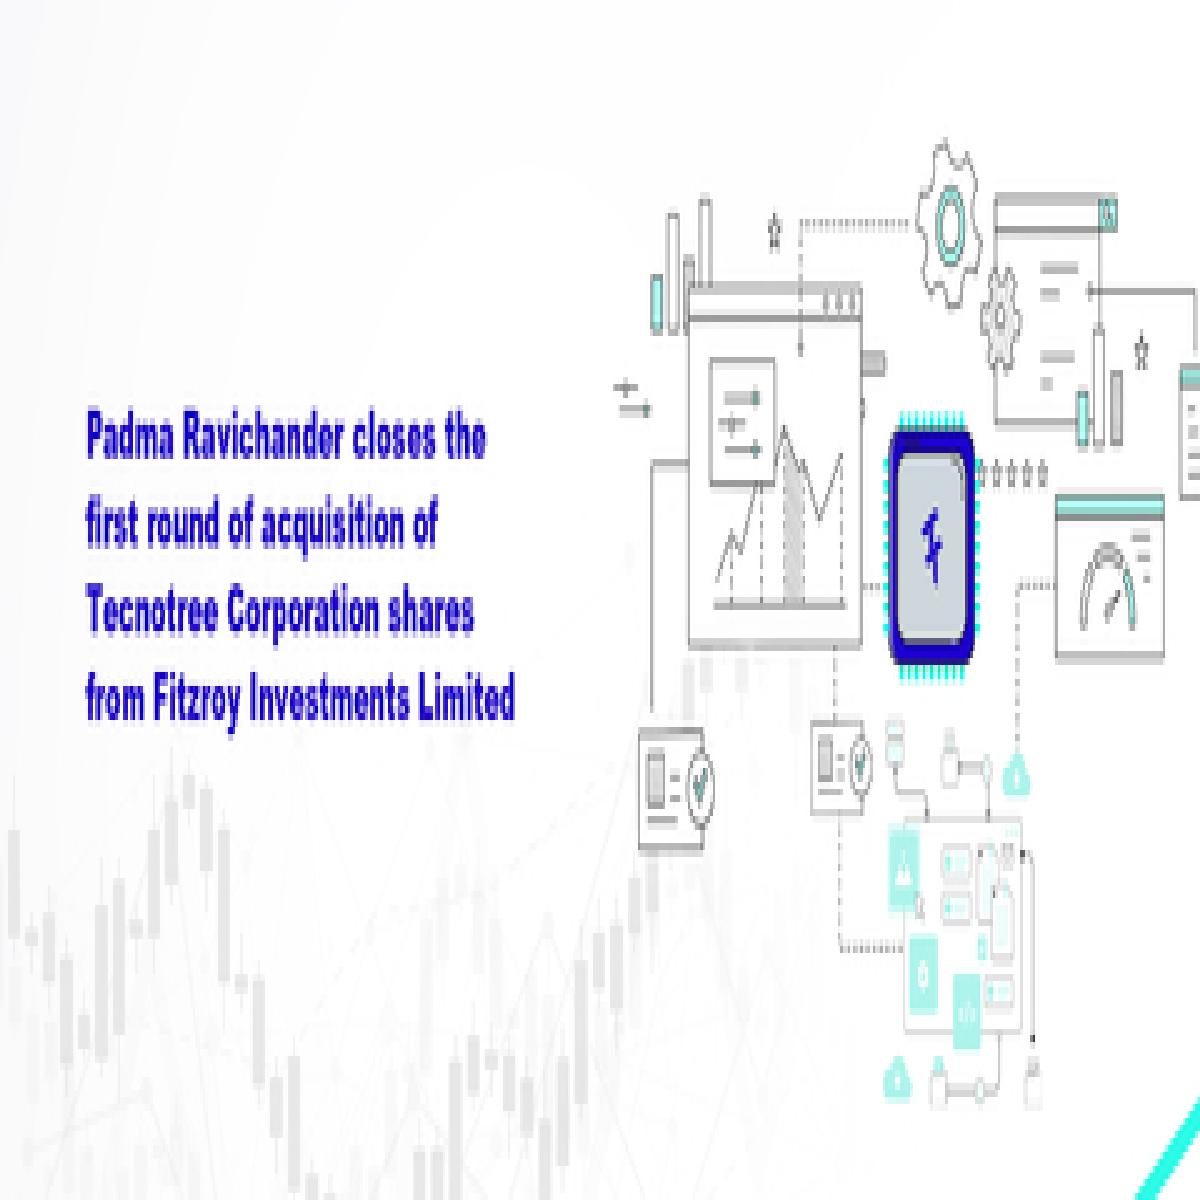 Padma Ravichander Closes the First Round of Acquisition of Tecnotree Corporation Shares from Fitzroy Investments Limited